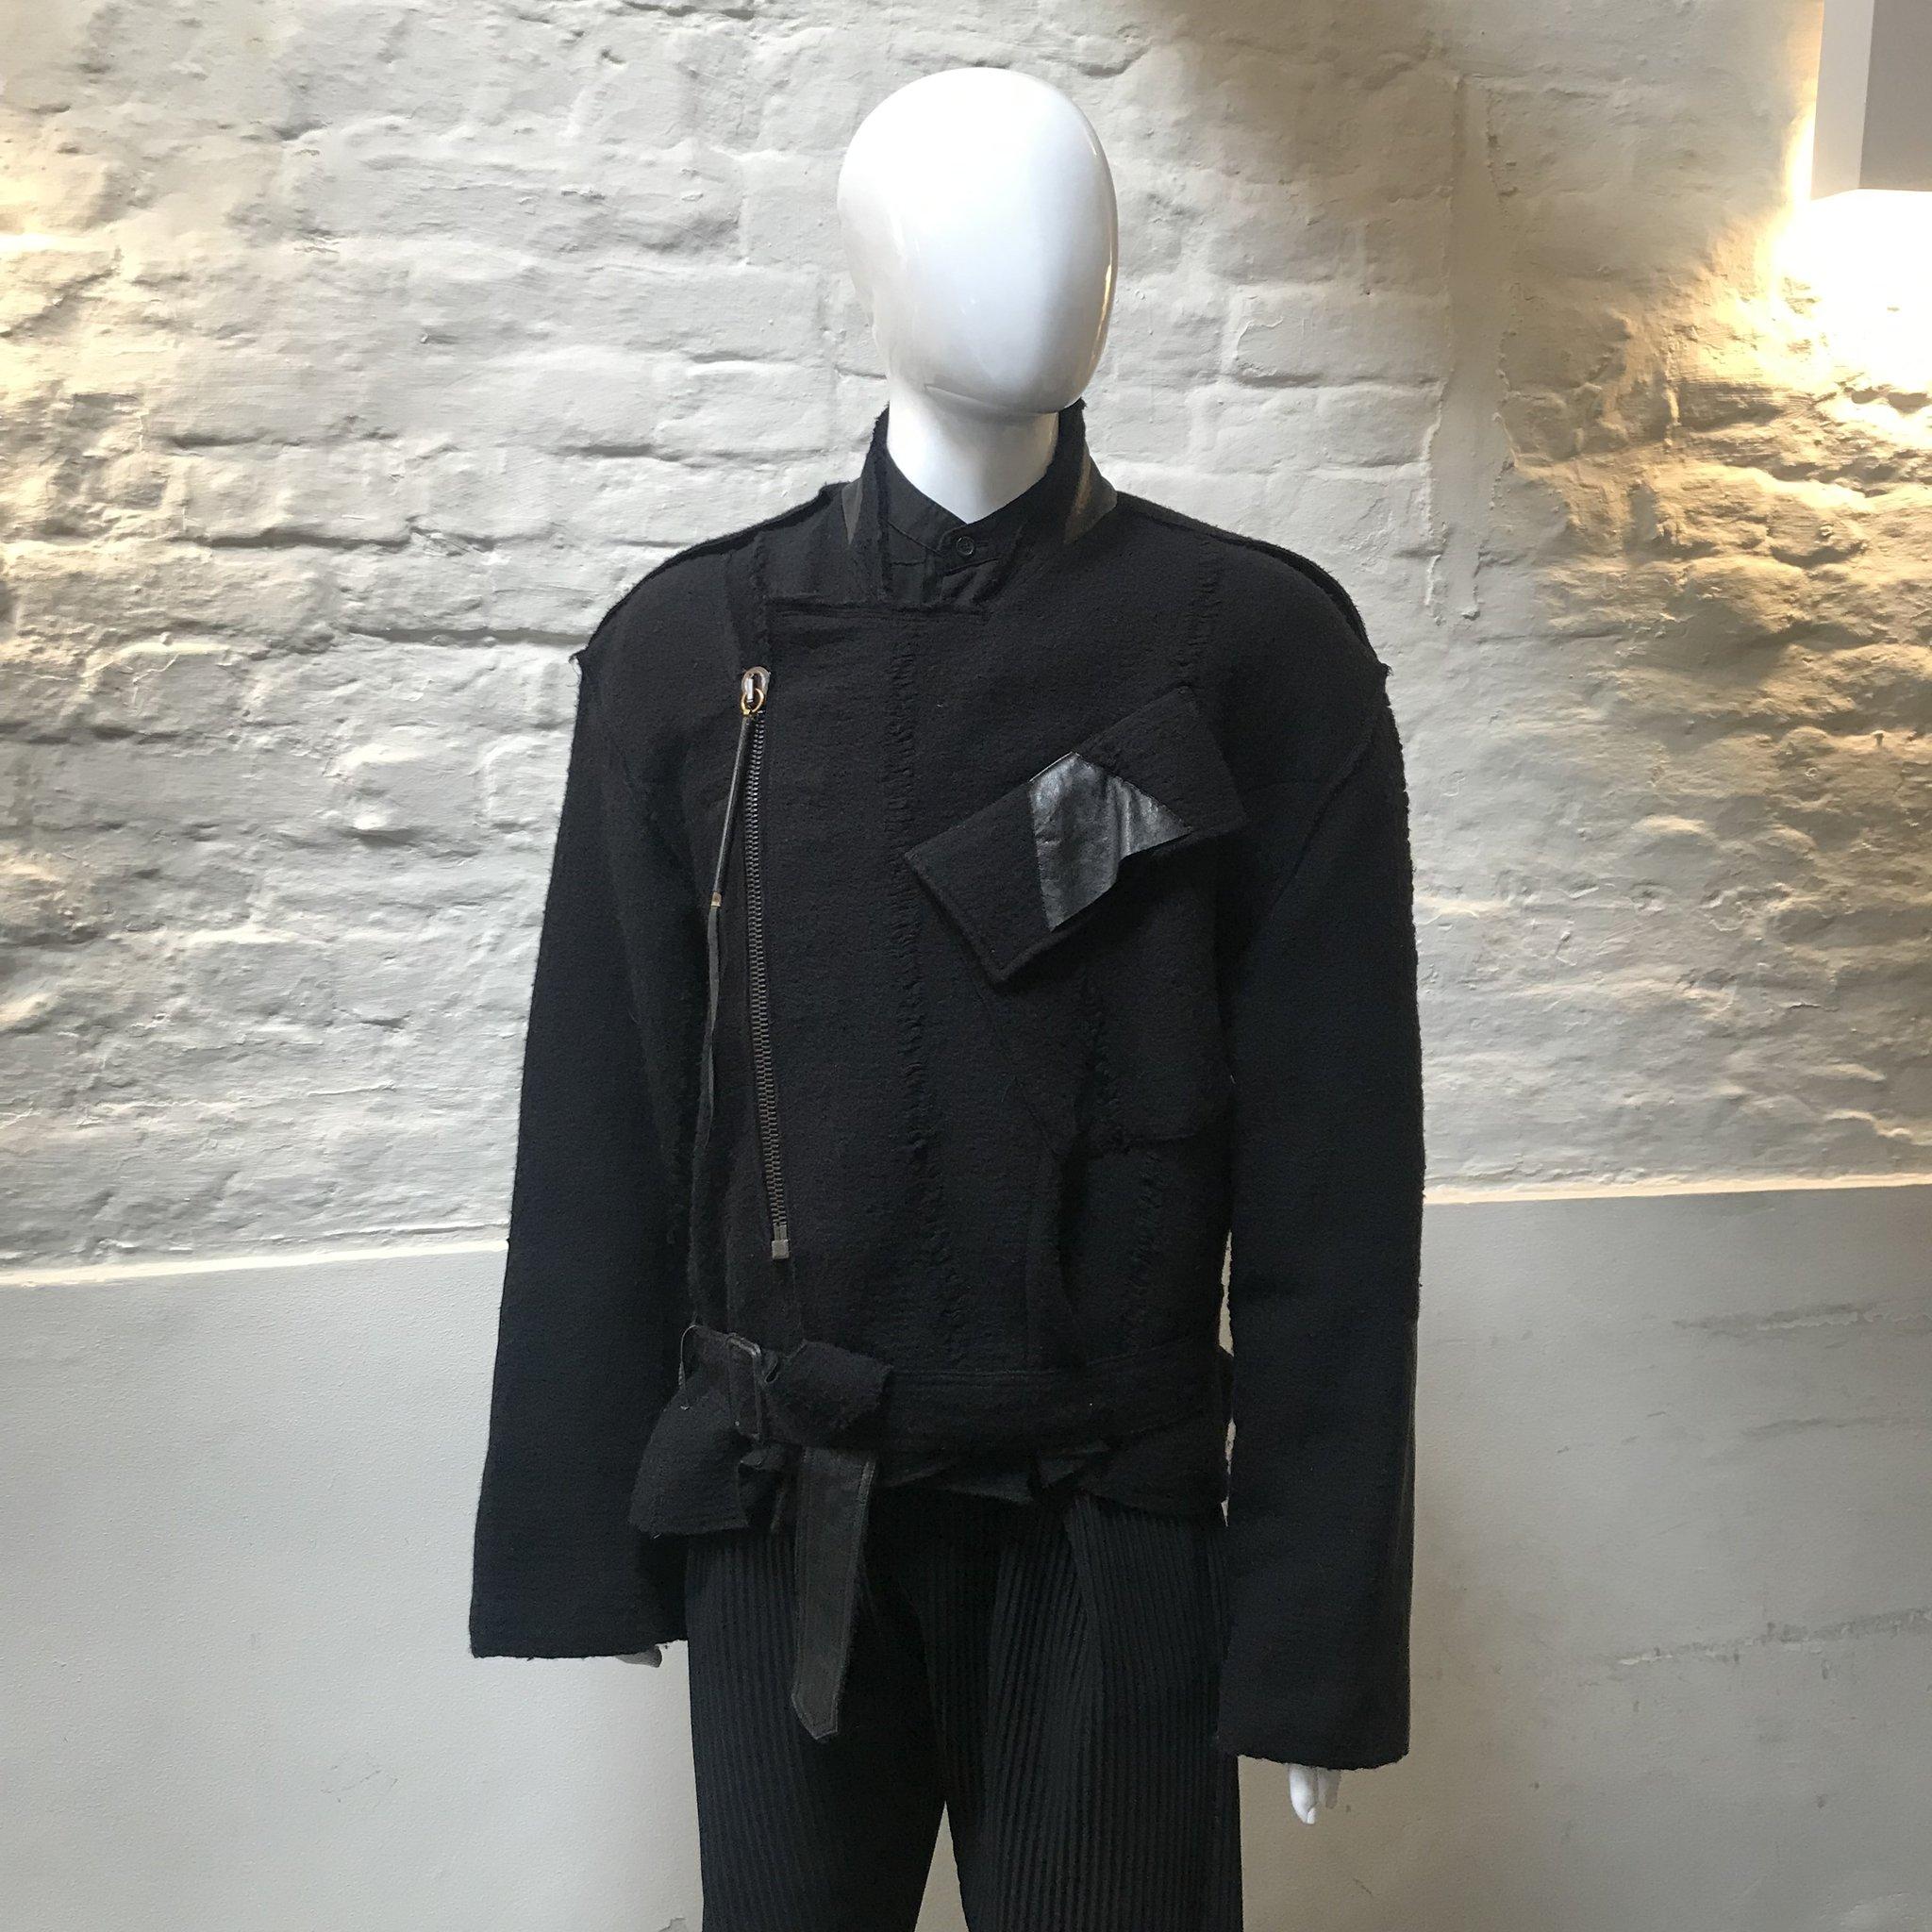 Damir Domas Deconstructed Jacket made in Paris from wool and customised by Benedict Lamb. 

Damir Doma is the founder and creative director of the Damir Doma brand. The Croatian-born designer grew up surrounded by toiles in his mother’s atelier in